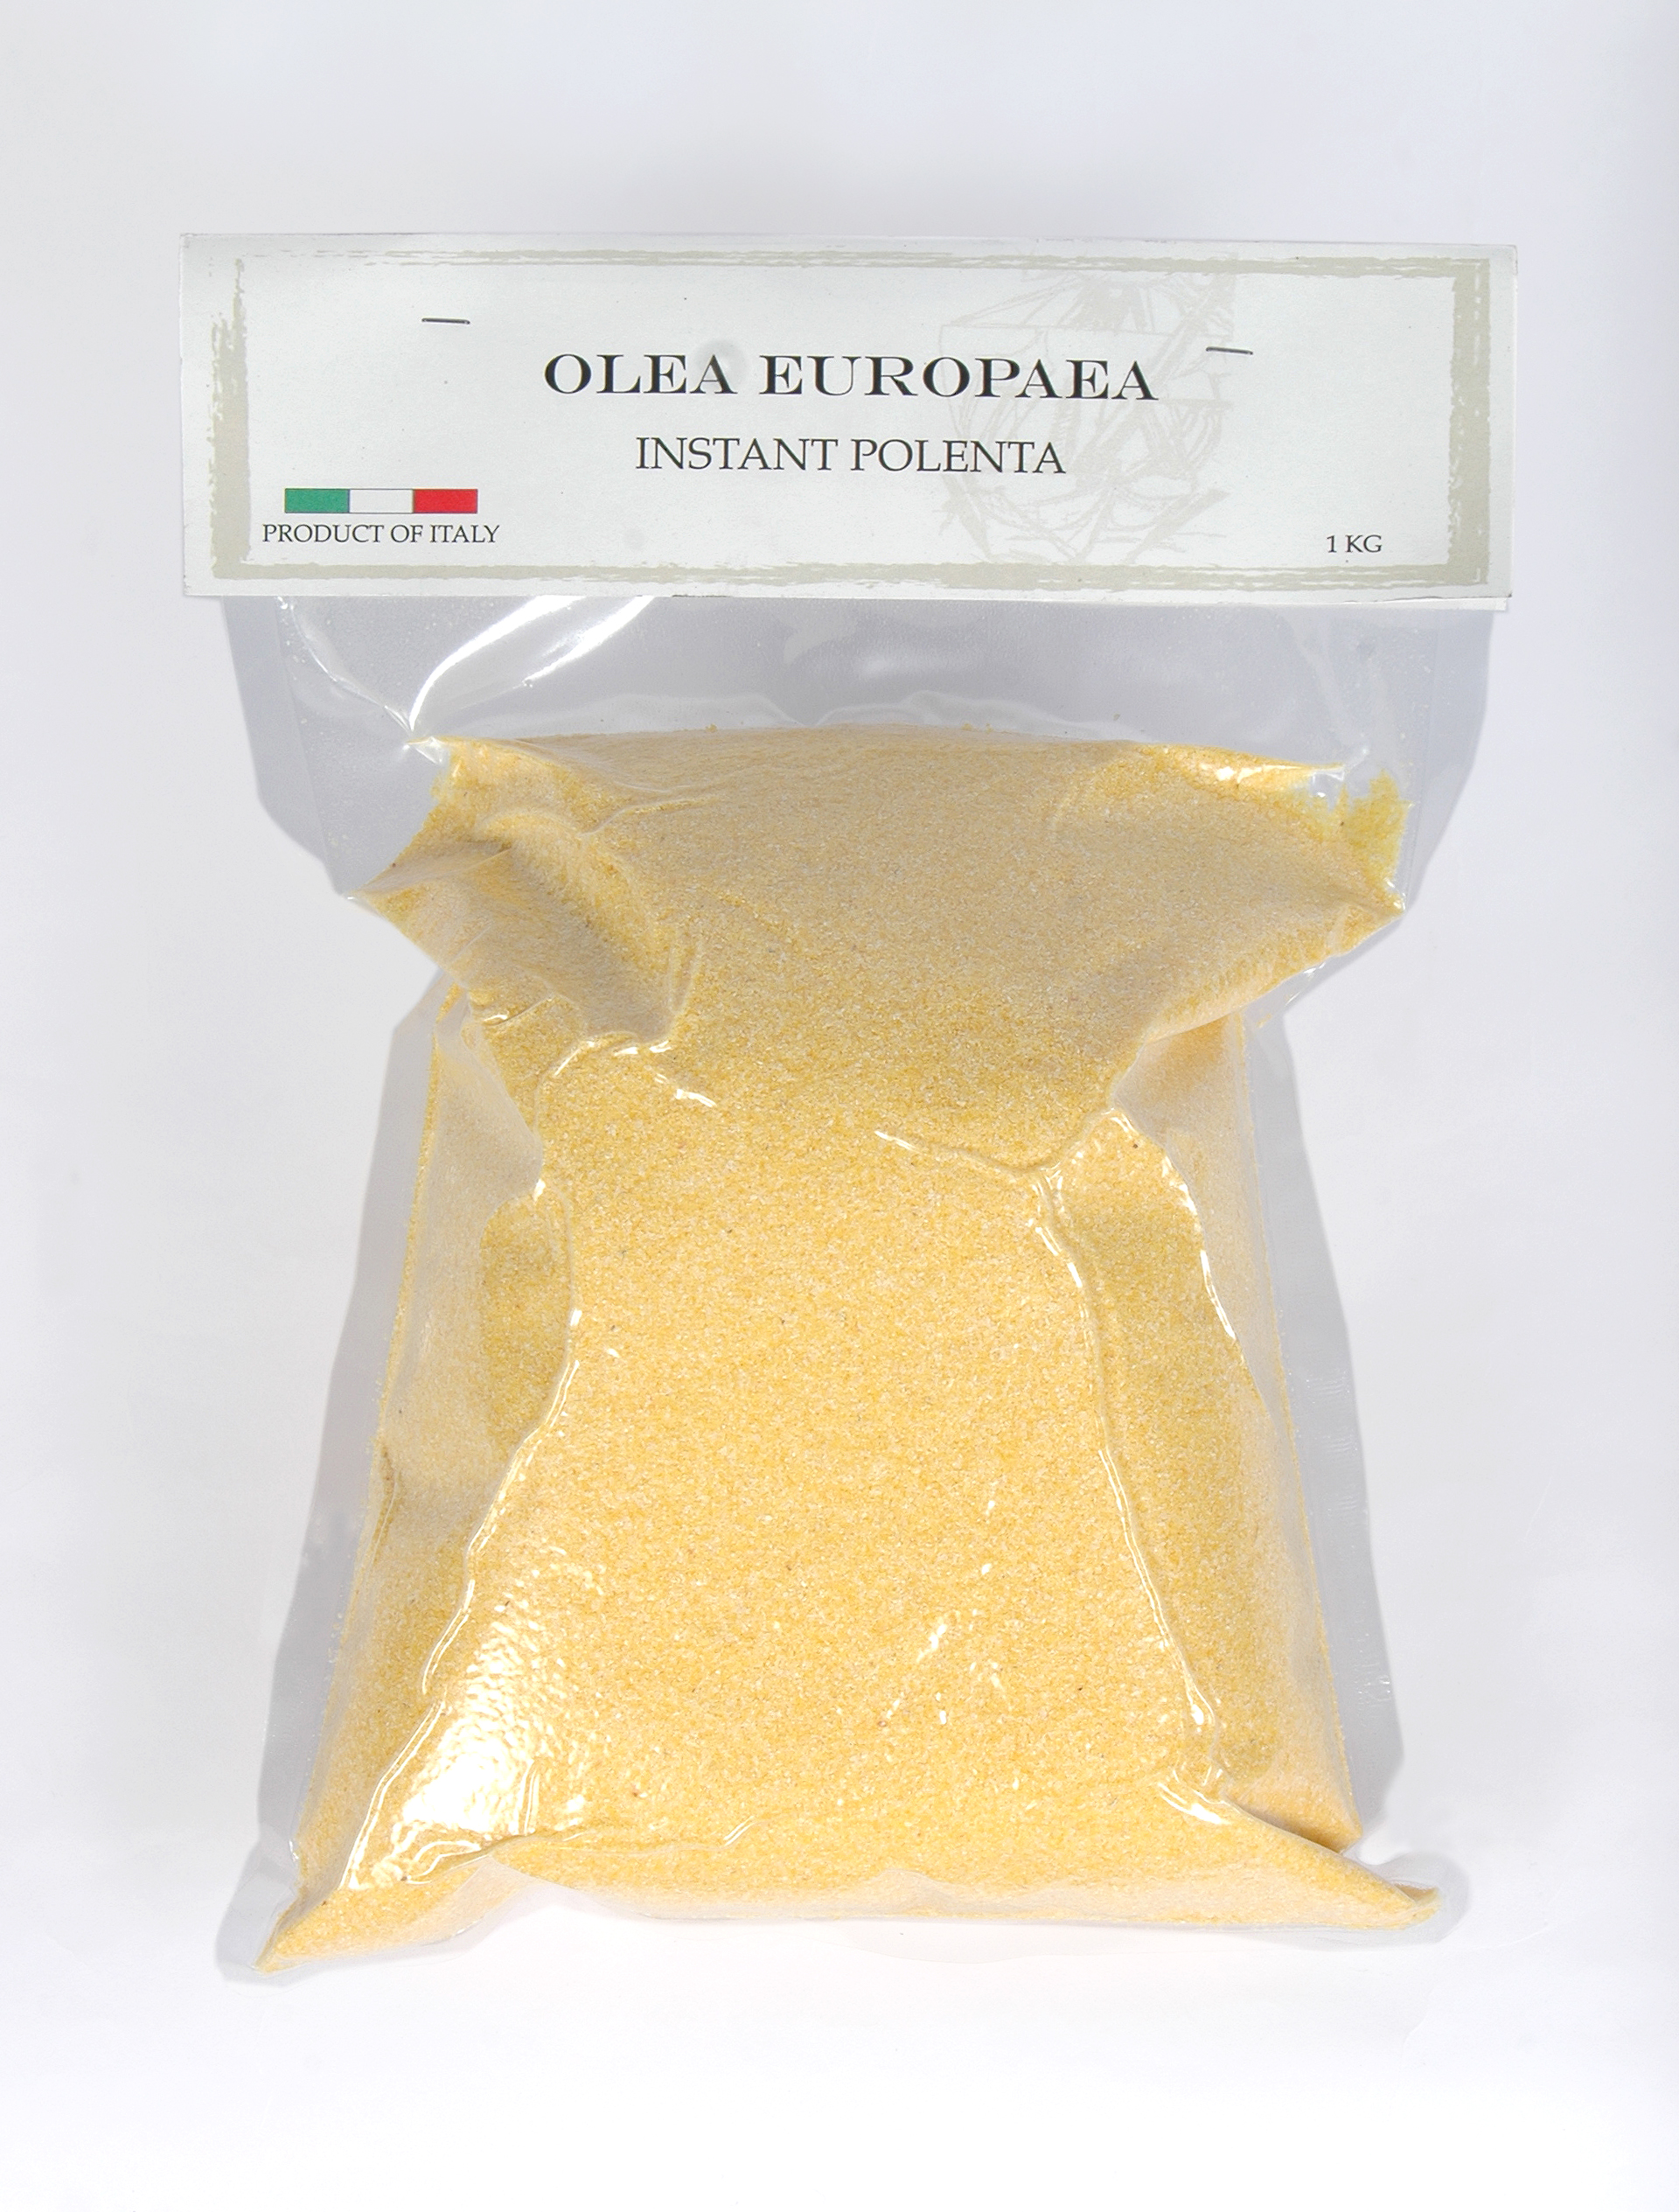 Our polenta is a gluten free and fibre rich alternative to wheat flours, and can be used in cakes, biscuits and pastries. This Northern Italian staple lends a sweet flavour and lovely grainy texture to your baking. It also works perfectly as an ingredient in several savoury dishes, like polenta crusted chicken or creamy polenta and mushroom ragout. 